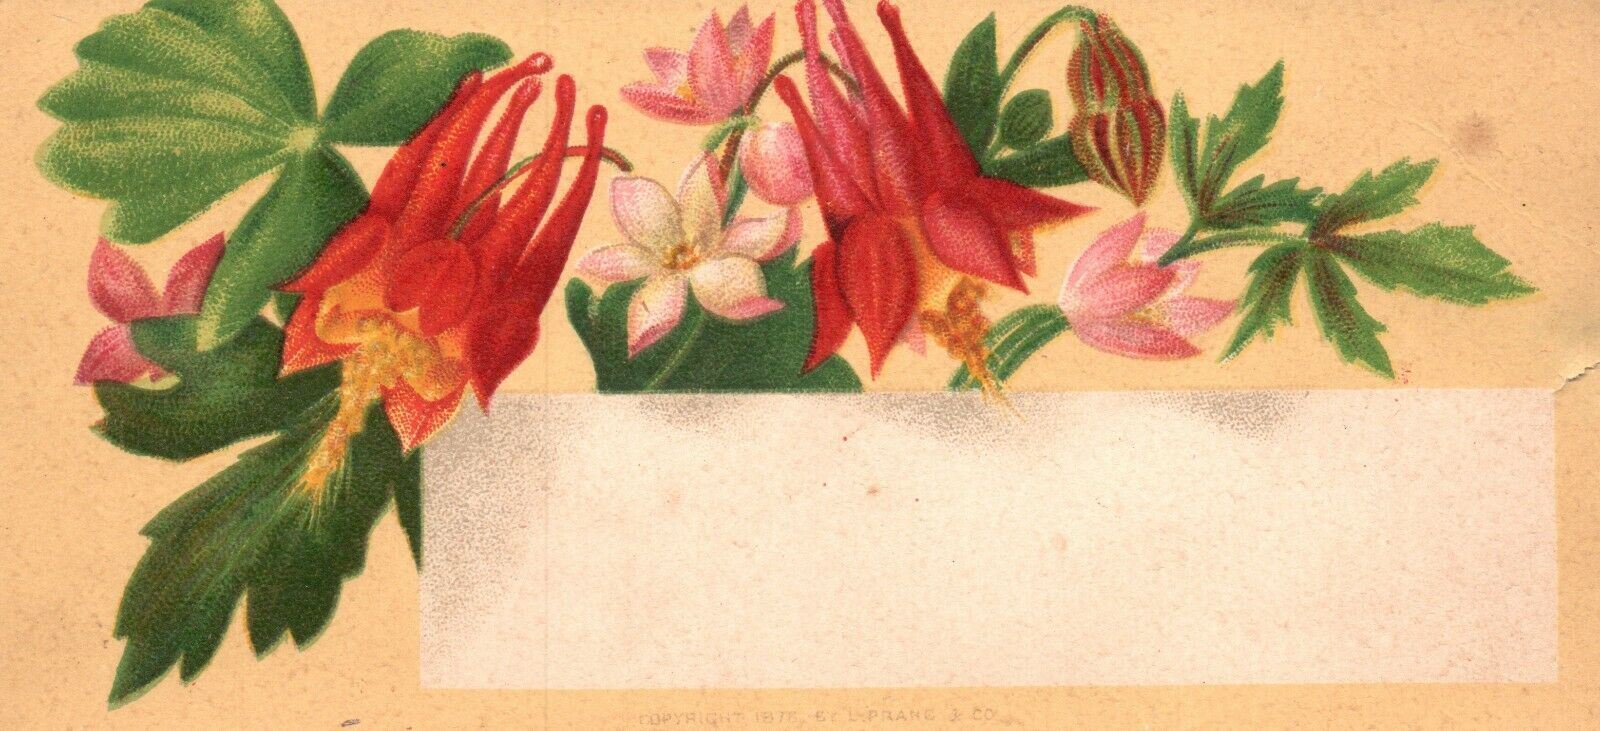 1880s-90s Blooming Red Flowers Greeting Trade Card